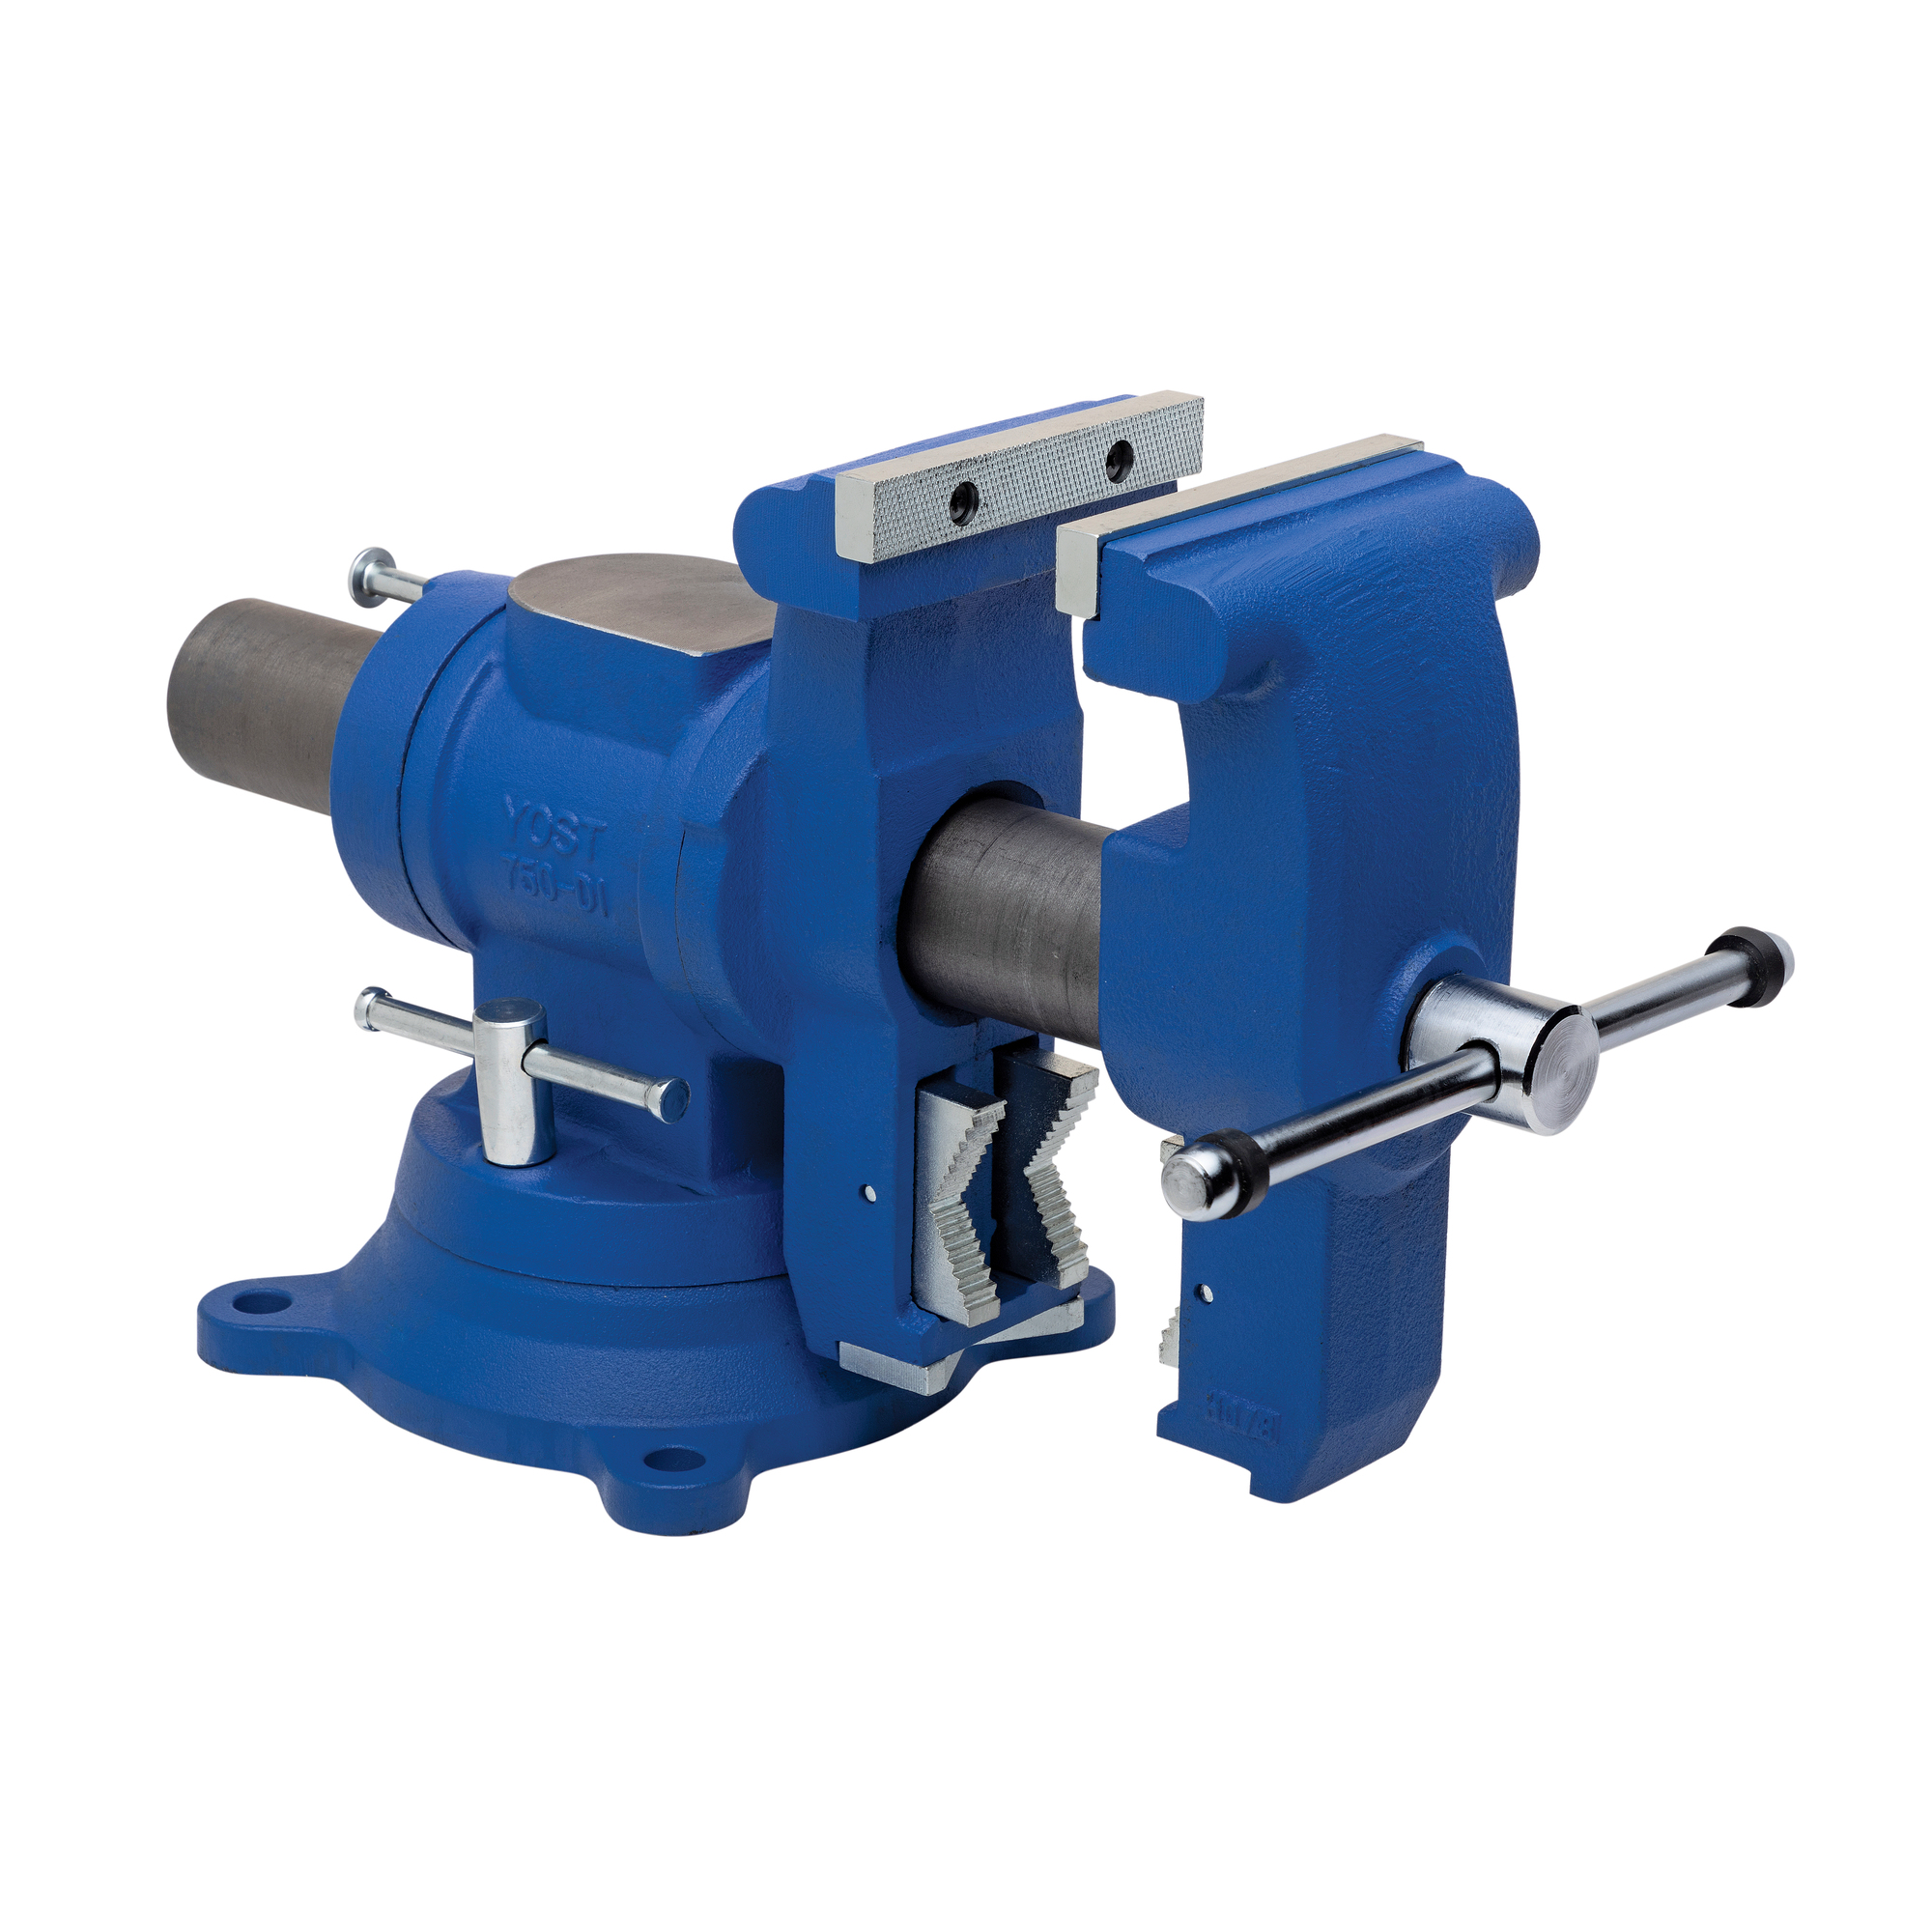 Yost Vises, 5Inch Multi Jaw Vise, Jaw Width 5 in, Jaw Capacity 5 in, Material Ductile Iron, Model 750-DI -  56432